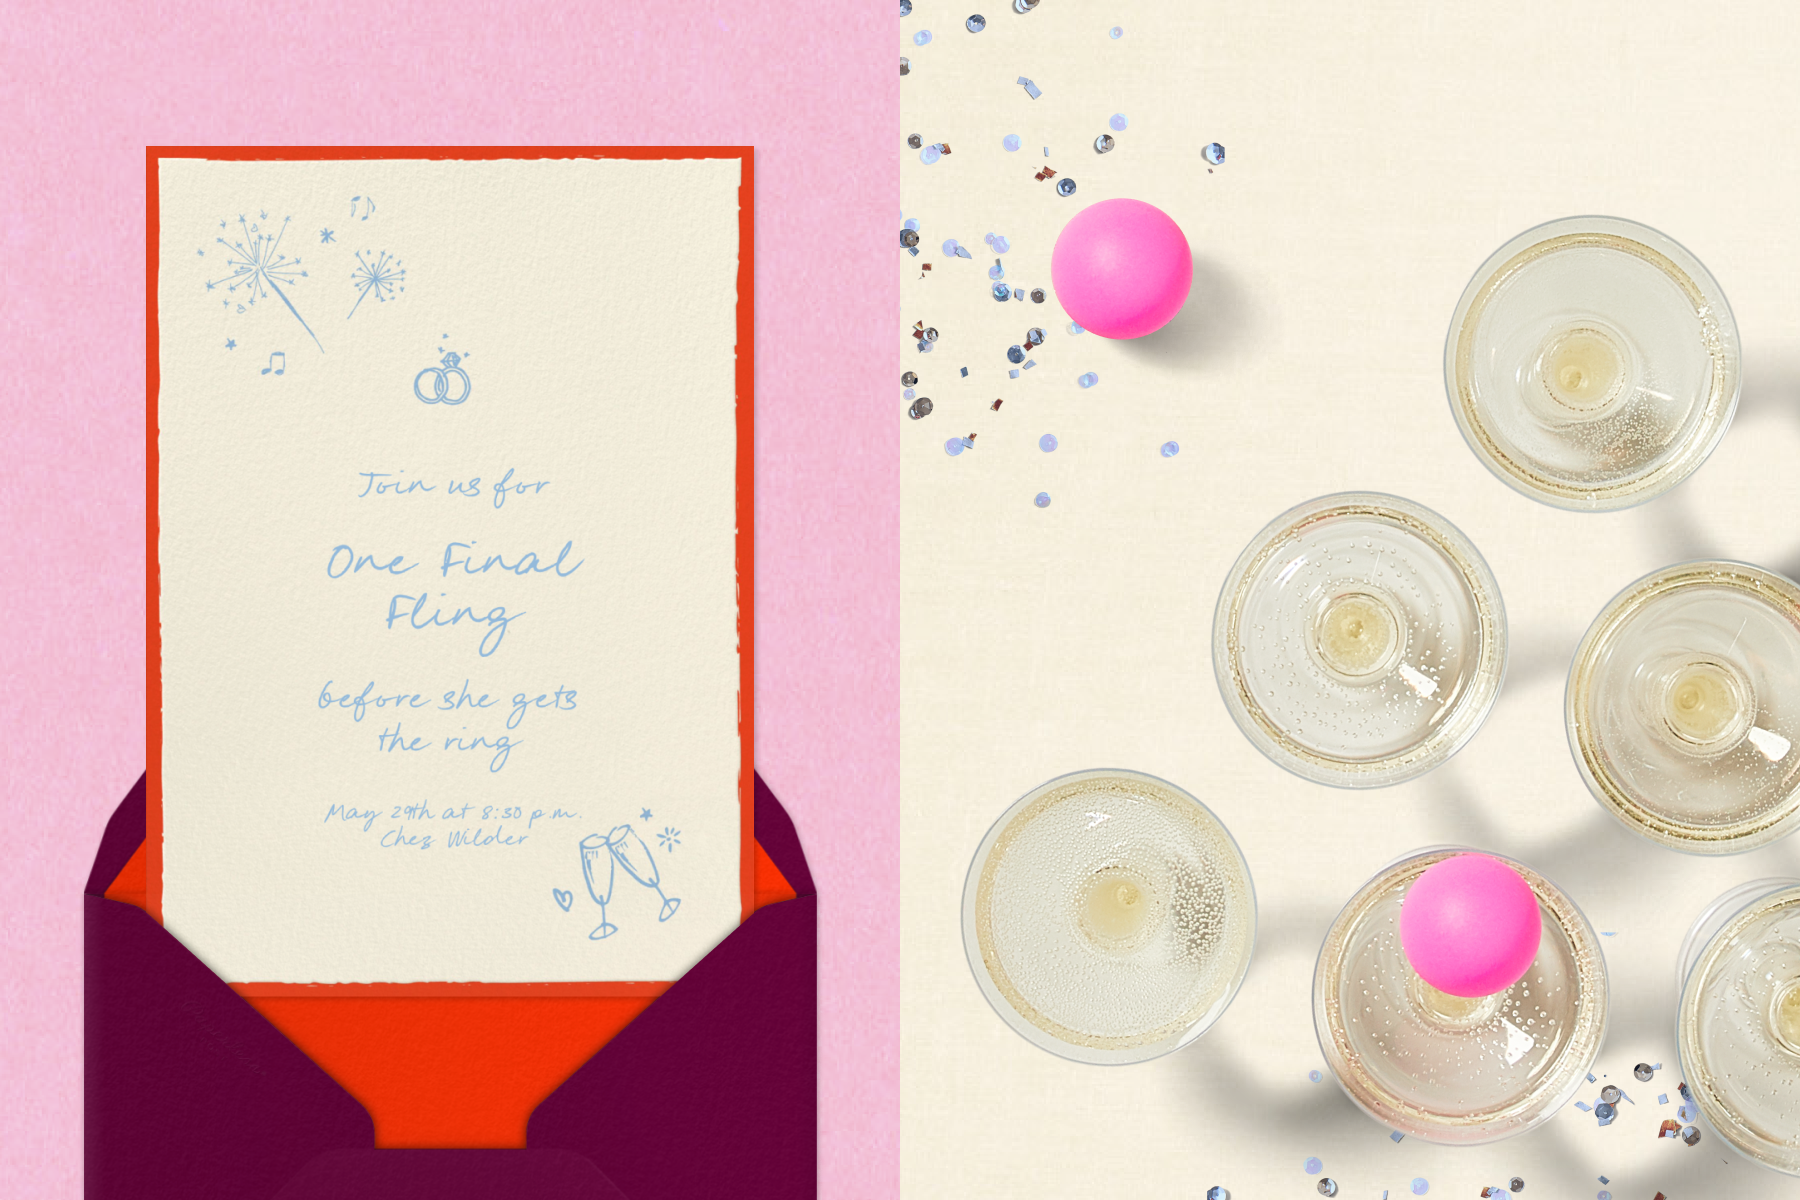 An invitation for ONE FINAL FLING with a red border and blue doodles of sparklers, Champagne flutes, and wedding rings emerging from a maroon envelope; coupe glasses in a triangle formation with pink ping pong balls and confetti.